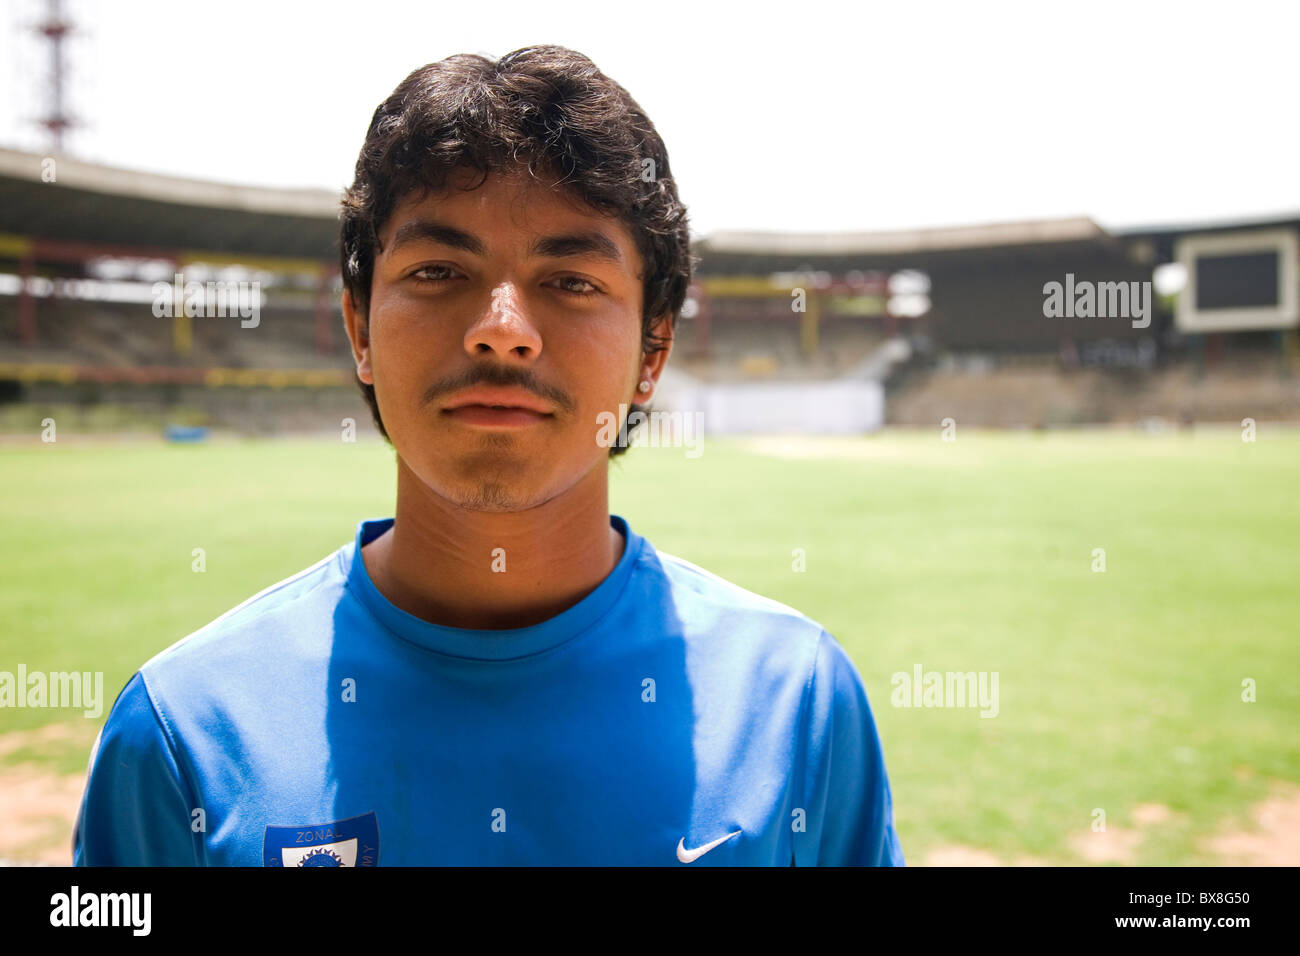 A talented Indian cricketer at the National Cricket Academy in Bengaluru, India. Stock Photo